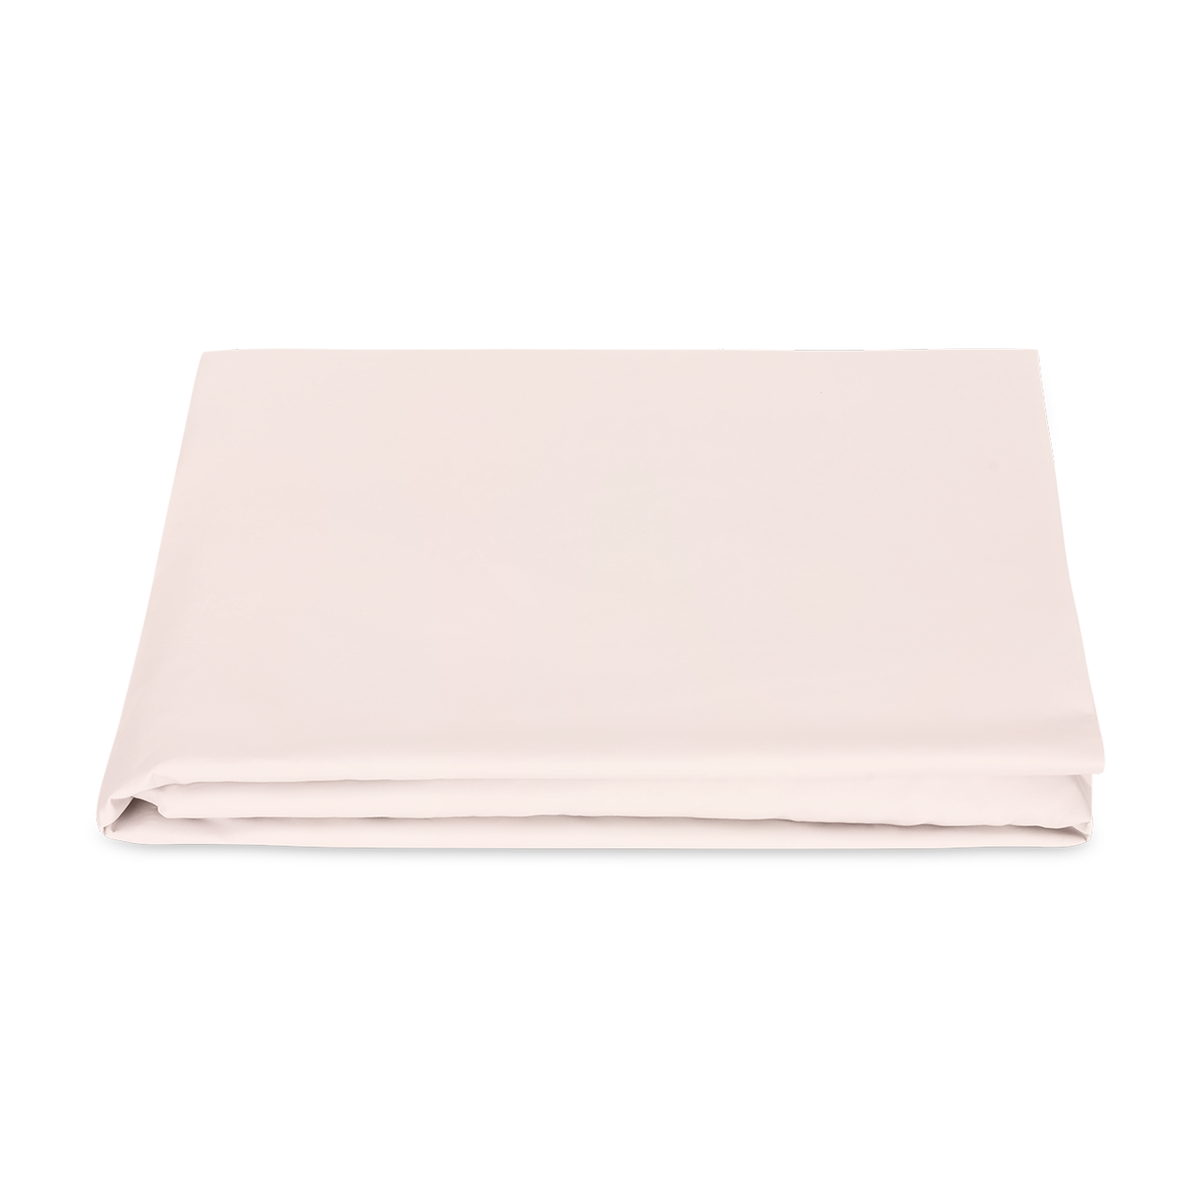 Folded Fitted Sheet of Matouk Milano Hemstitch Bedding in Color Blush